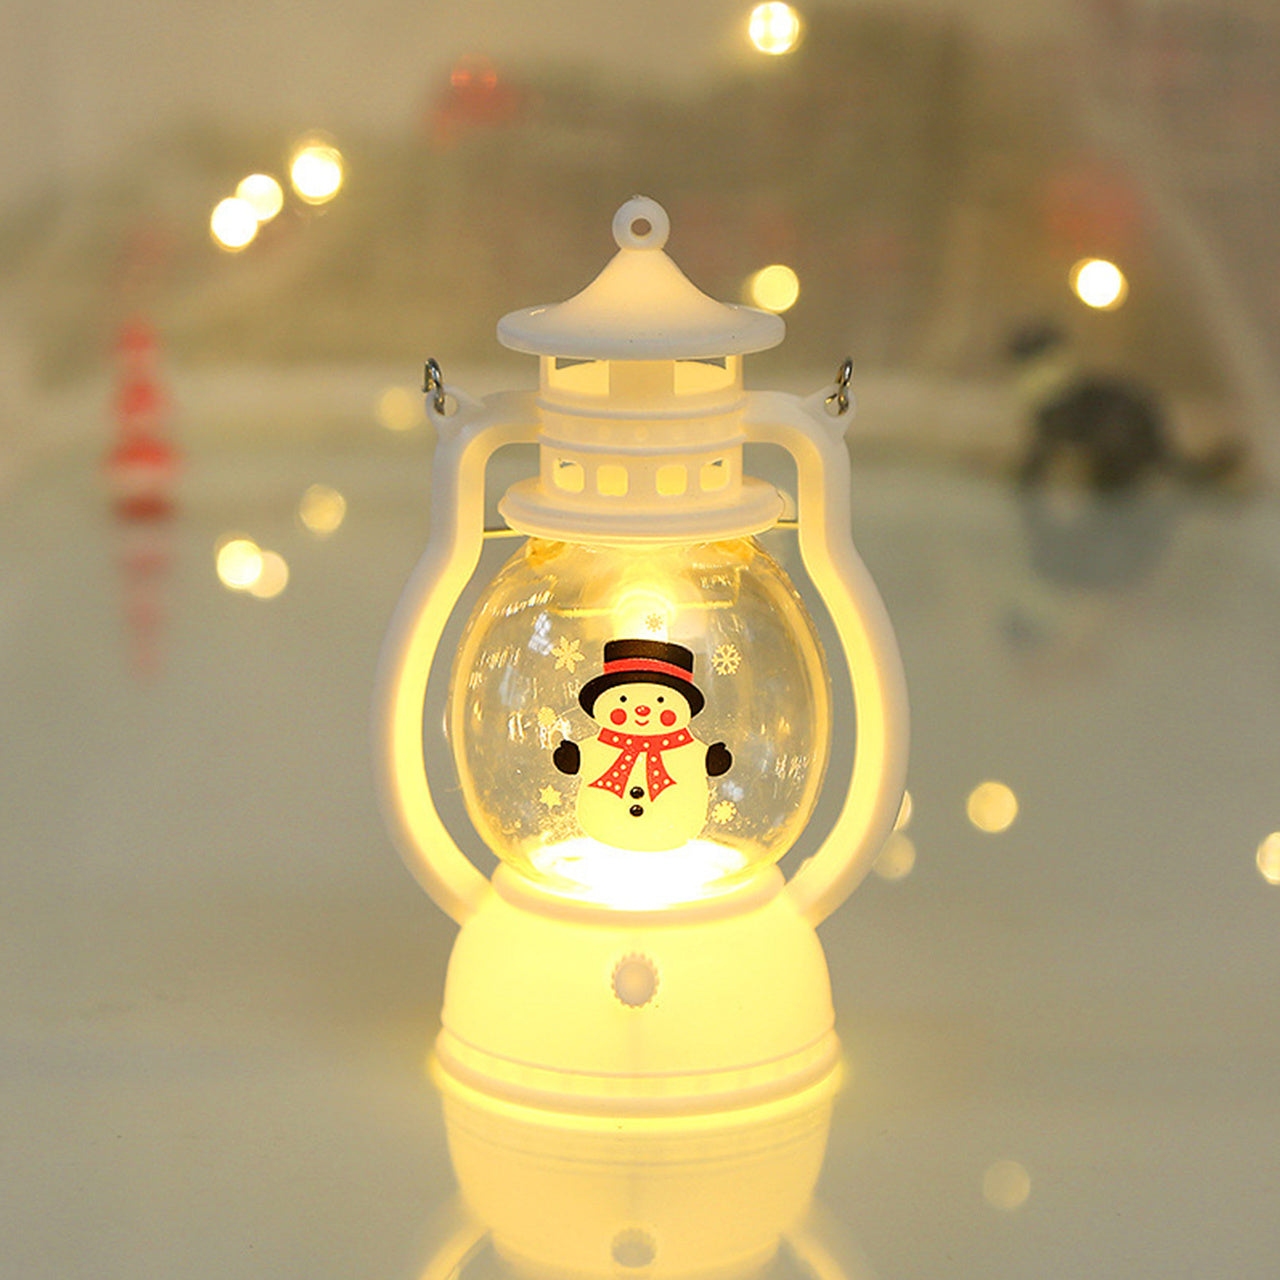 1pc White Christmas Lantern - Santa Claus Snowman Christmas Tree, Hanging Or Standing Electric Candle Lamp For Tables & Desks, Decorations For Home & Office, Holiday Home Decor